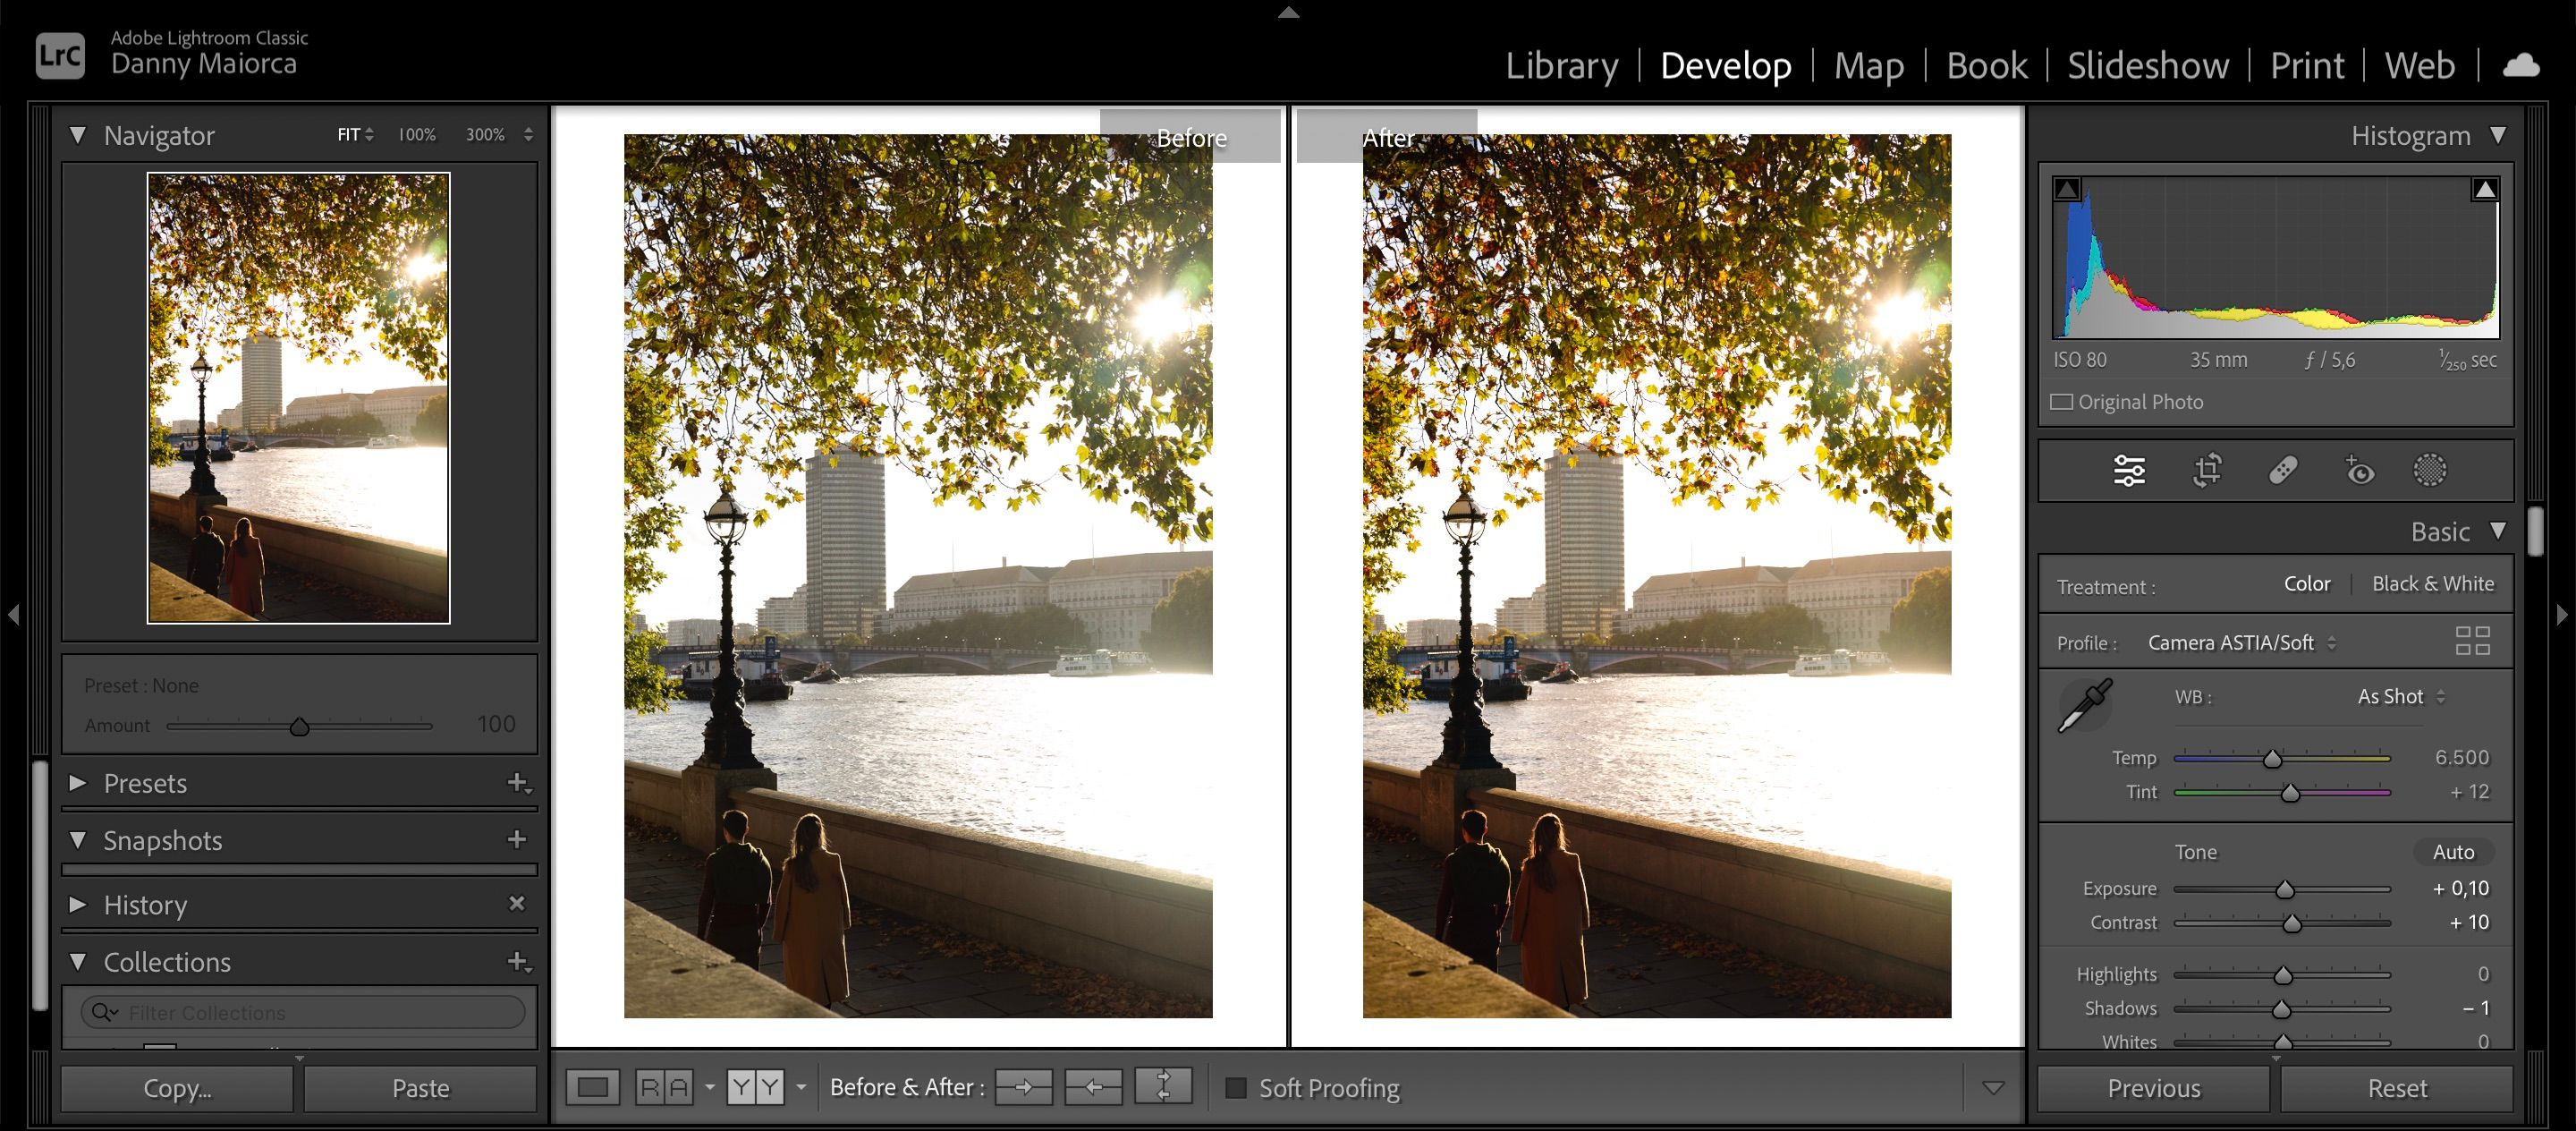 Comparing Photos in Lightroom Classic Side-by-Side